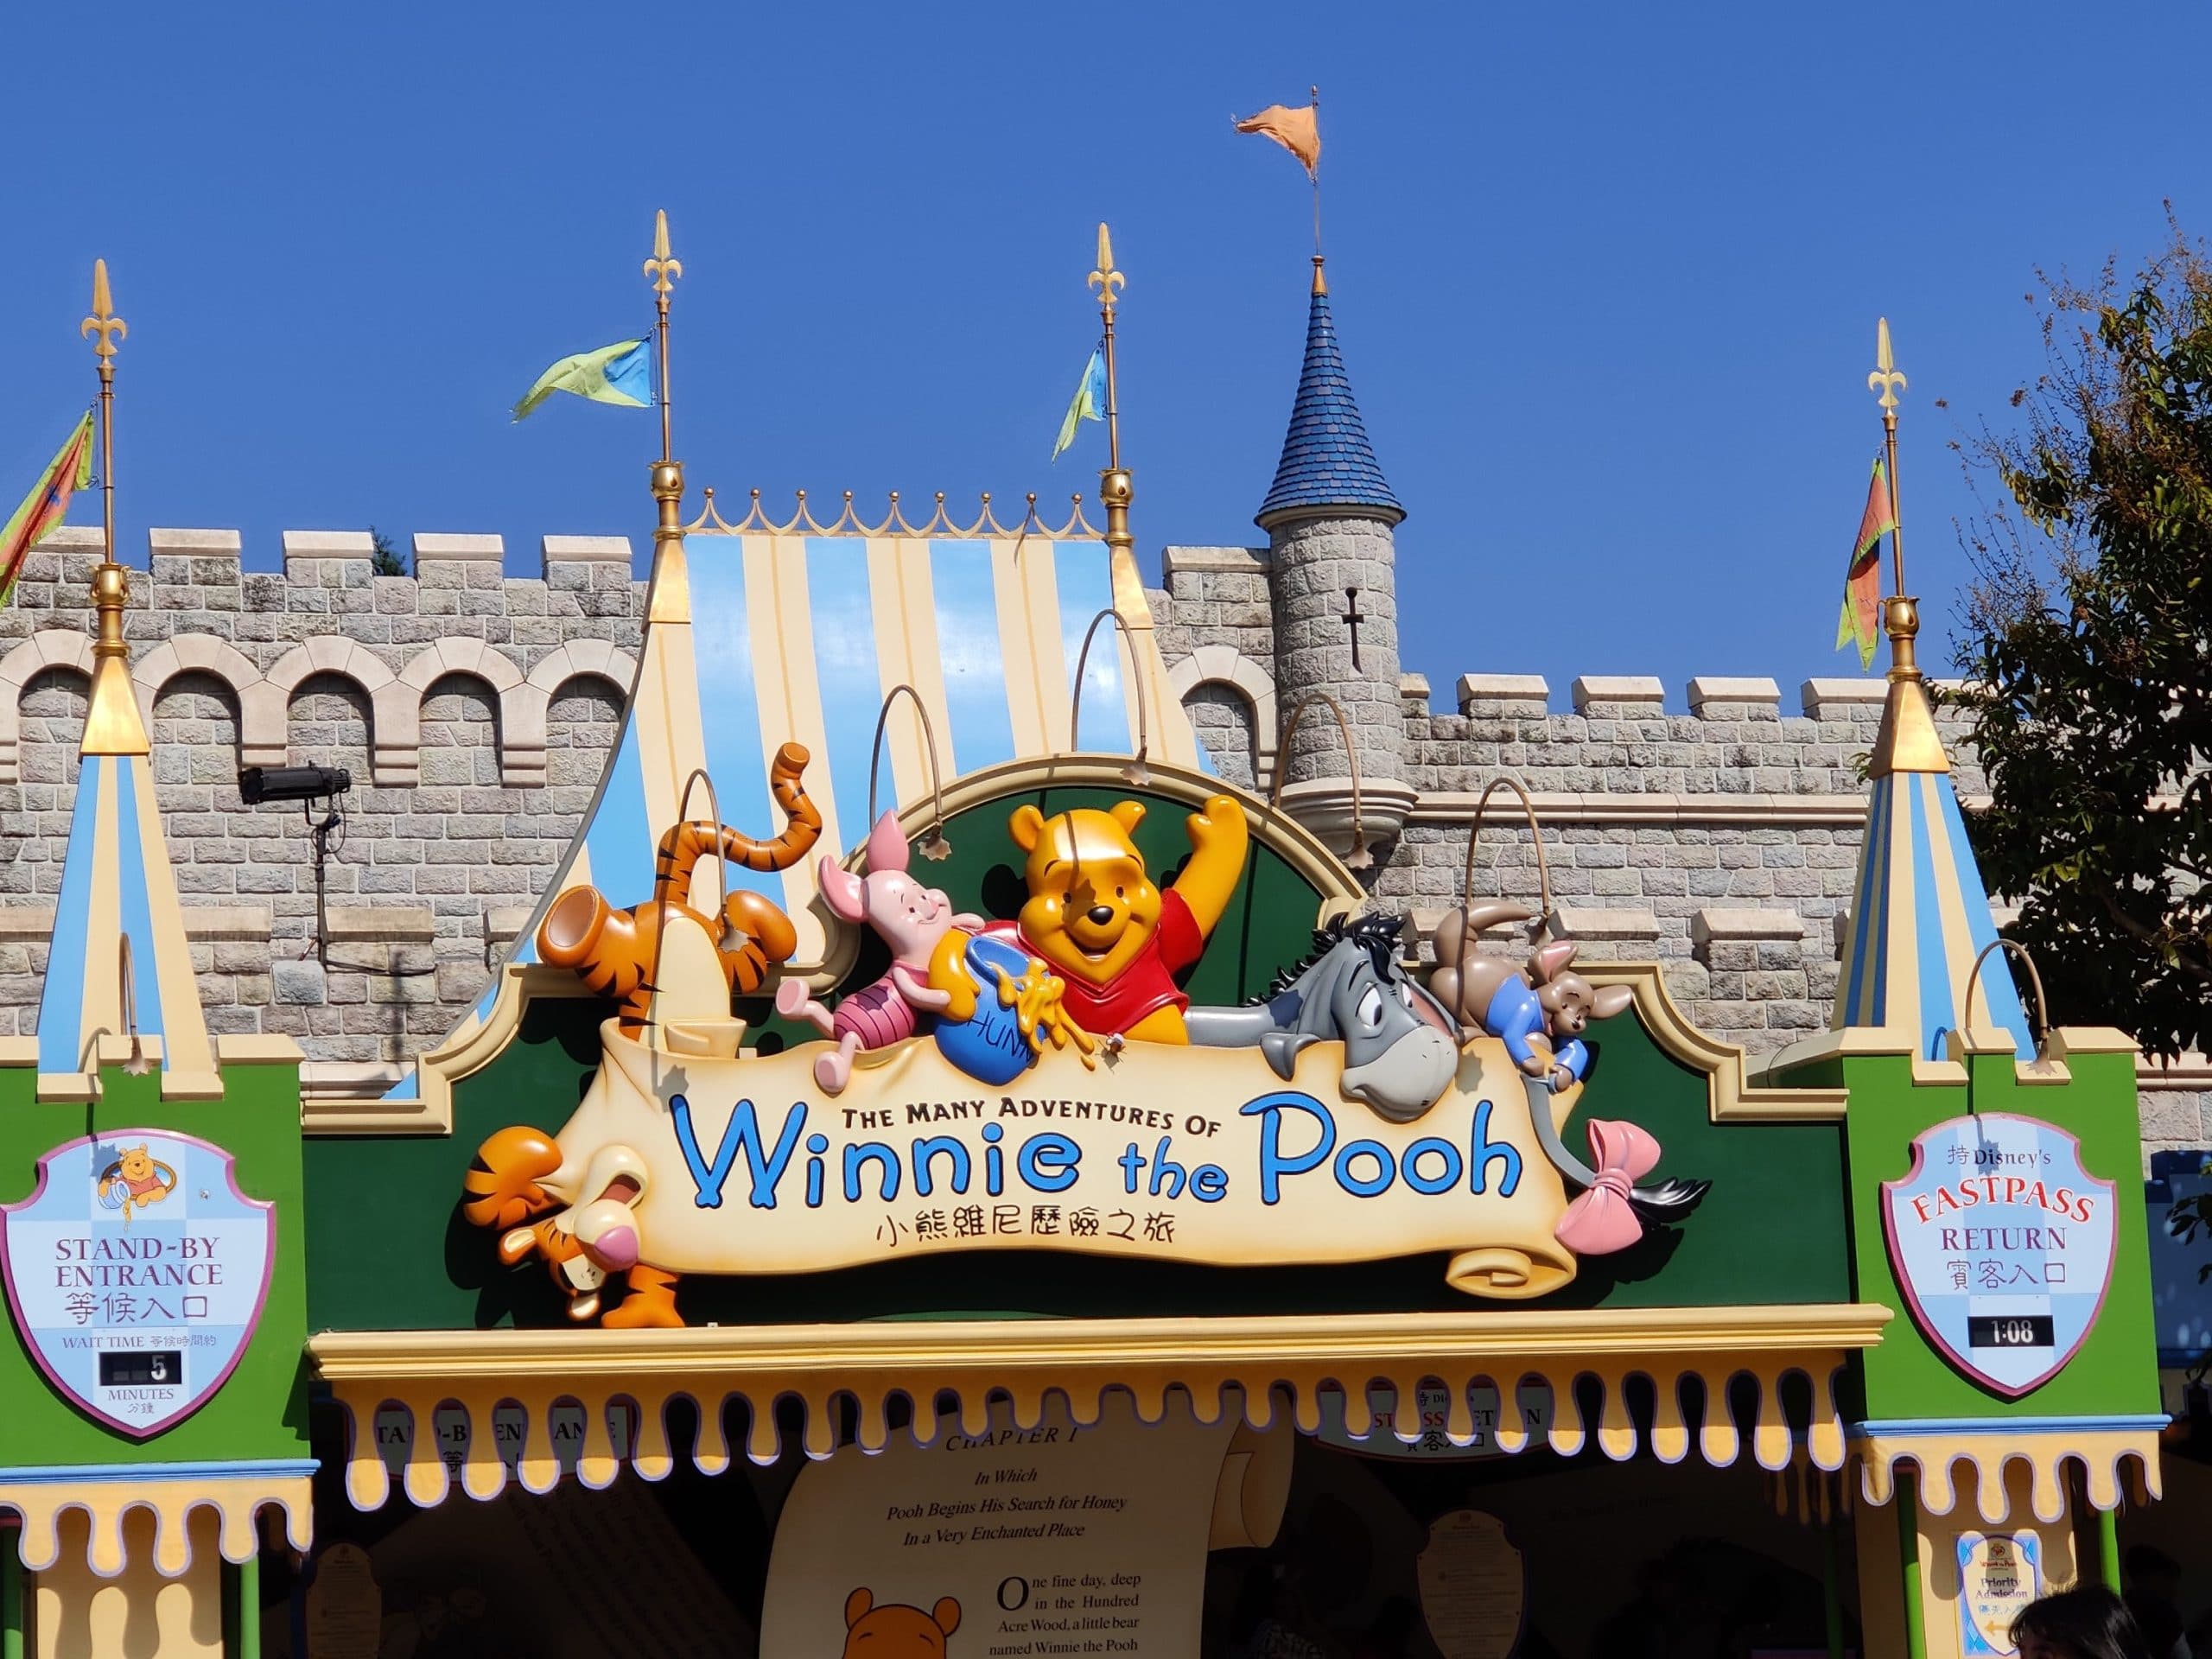 The Many Adventures of Winnie the Pooh ride at Disney World